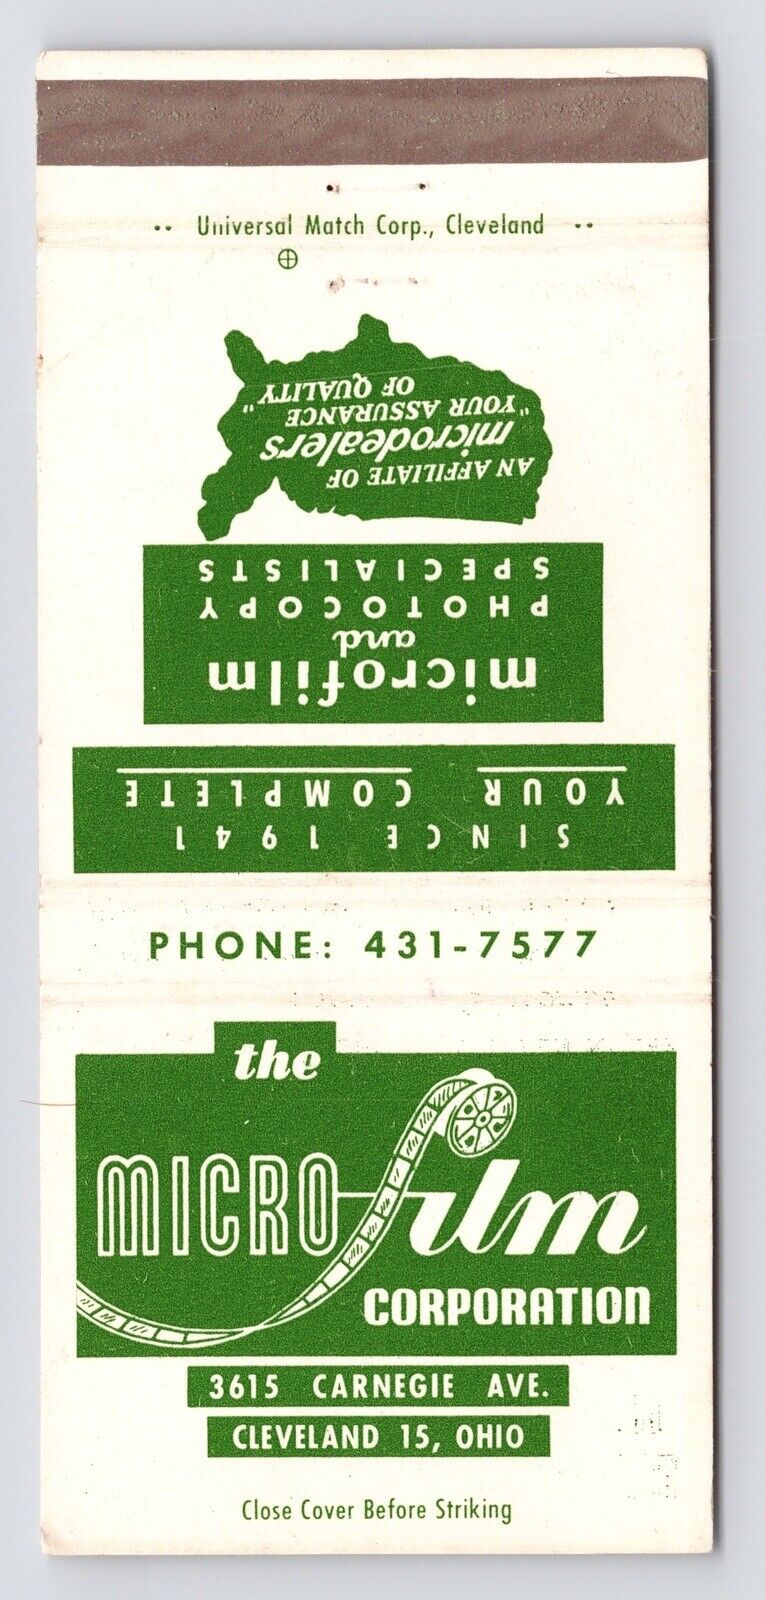 c1970s-80s~Cleveland Ohio OH~Microfilm Corporation~VTG Matchbook Cover